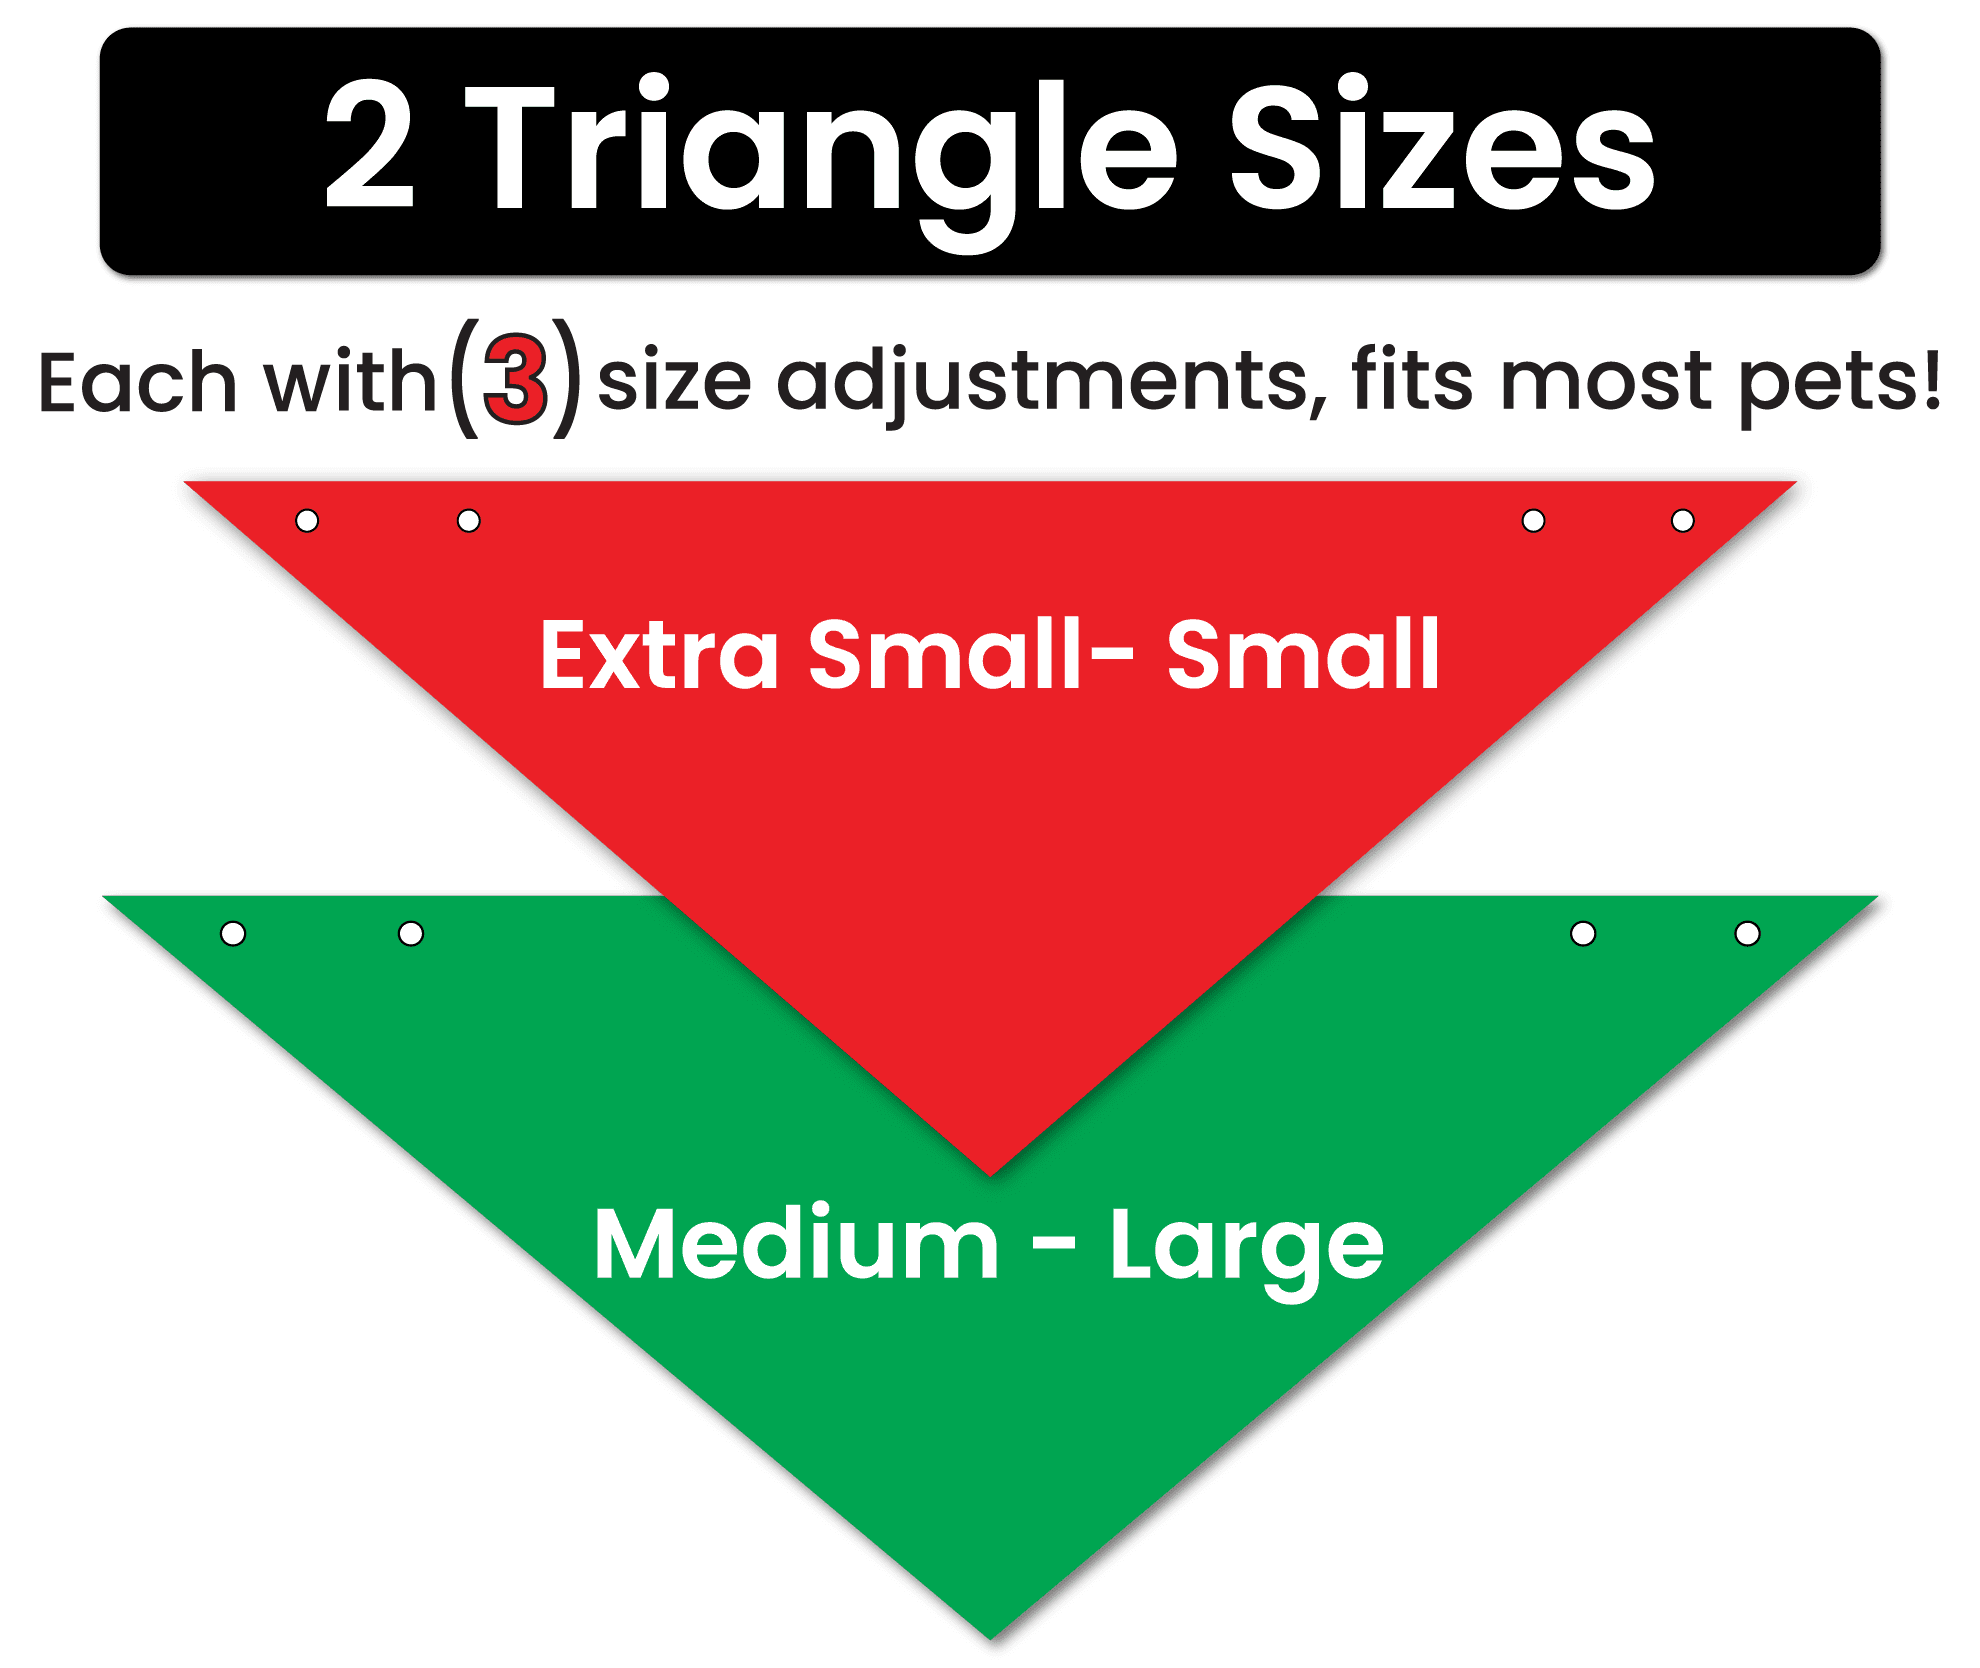 size chart showing snap and go pet triangle sizes